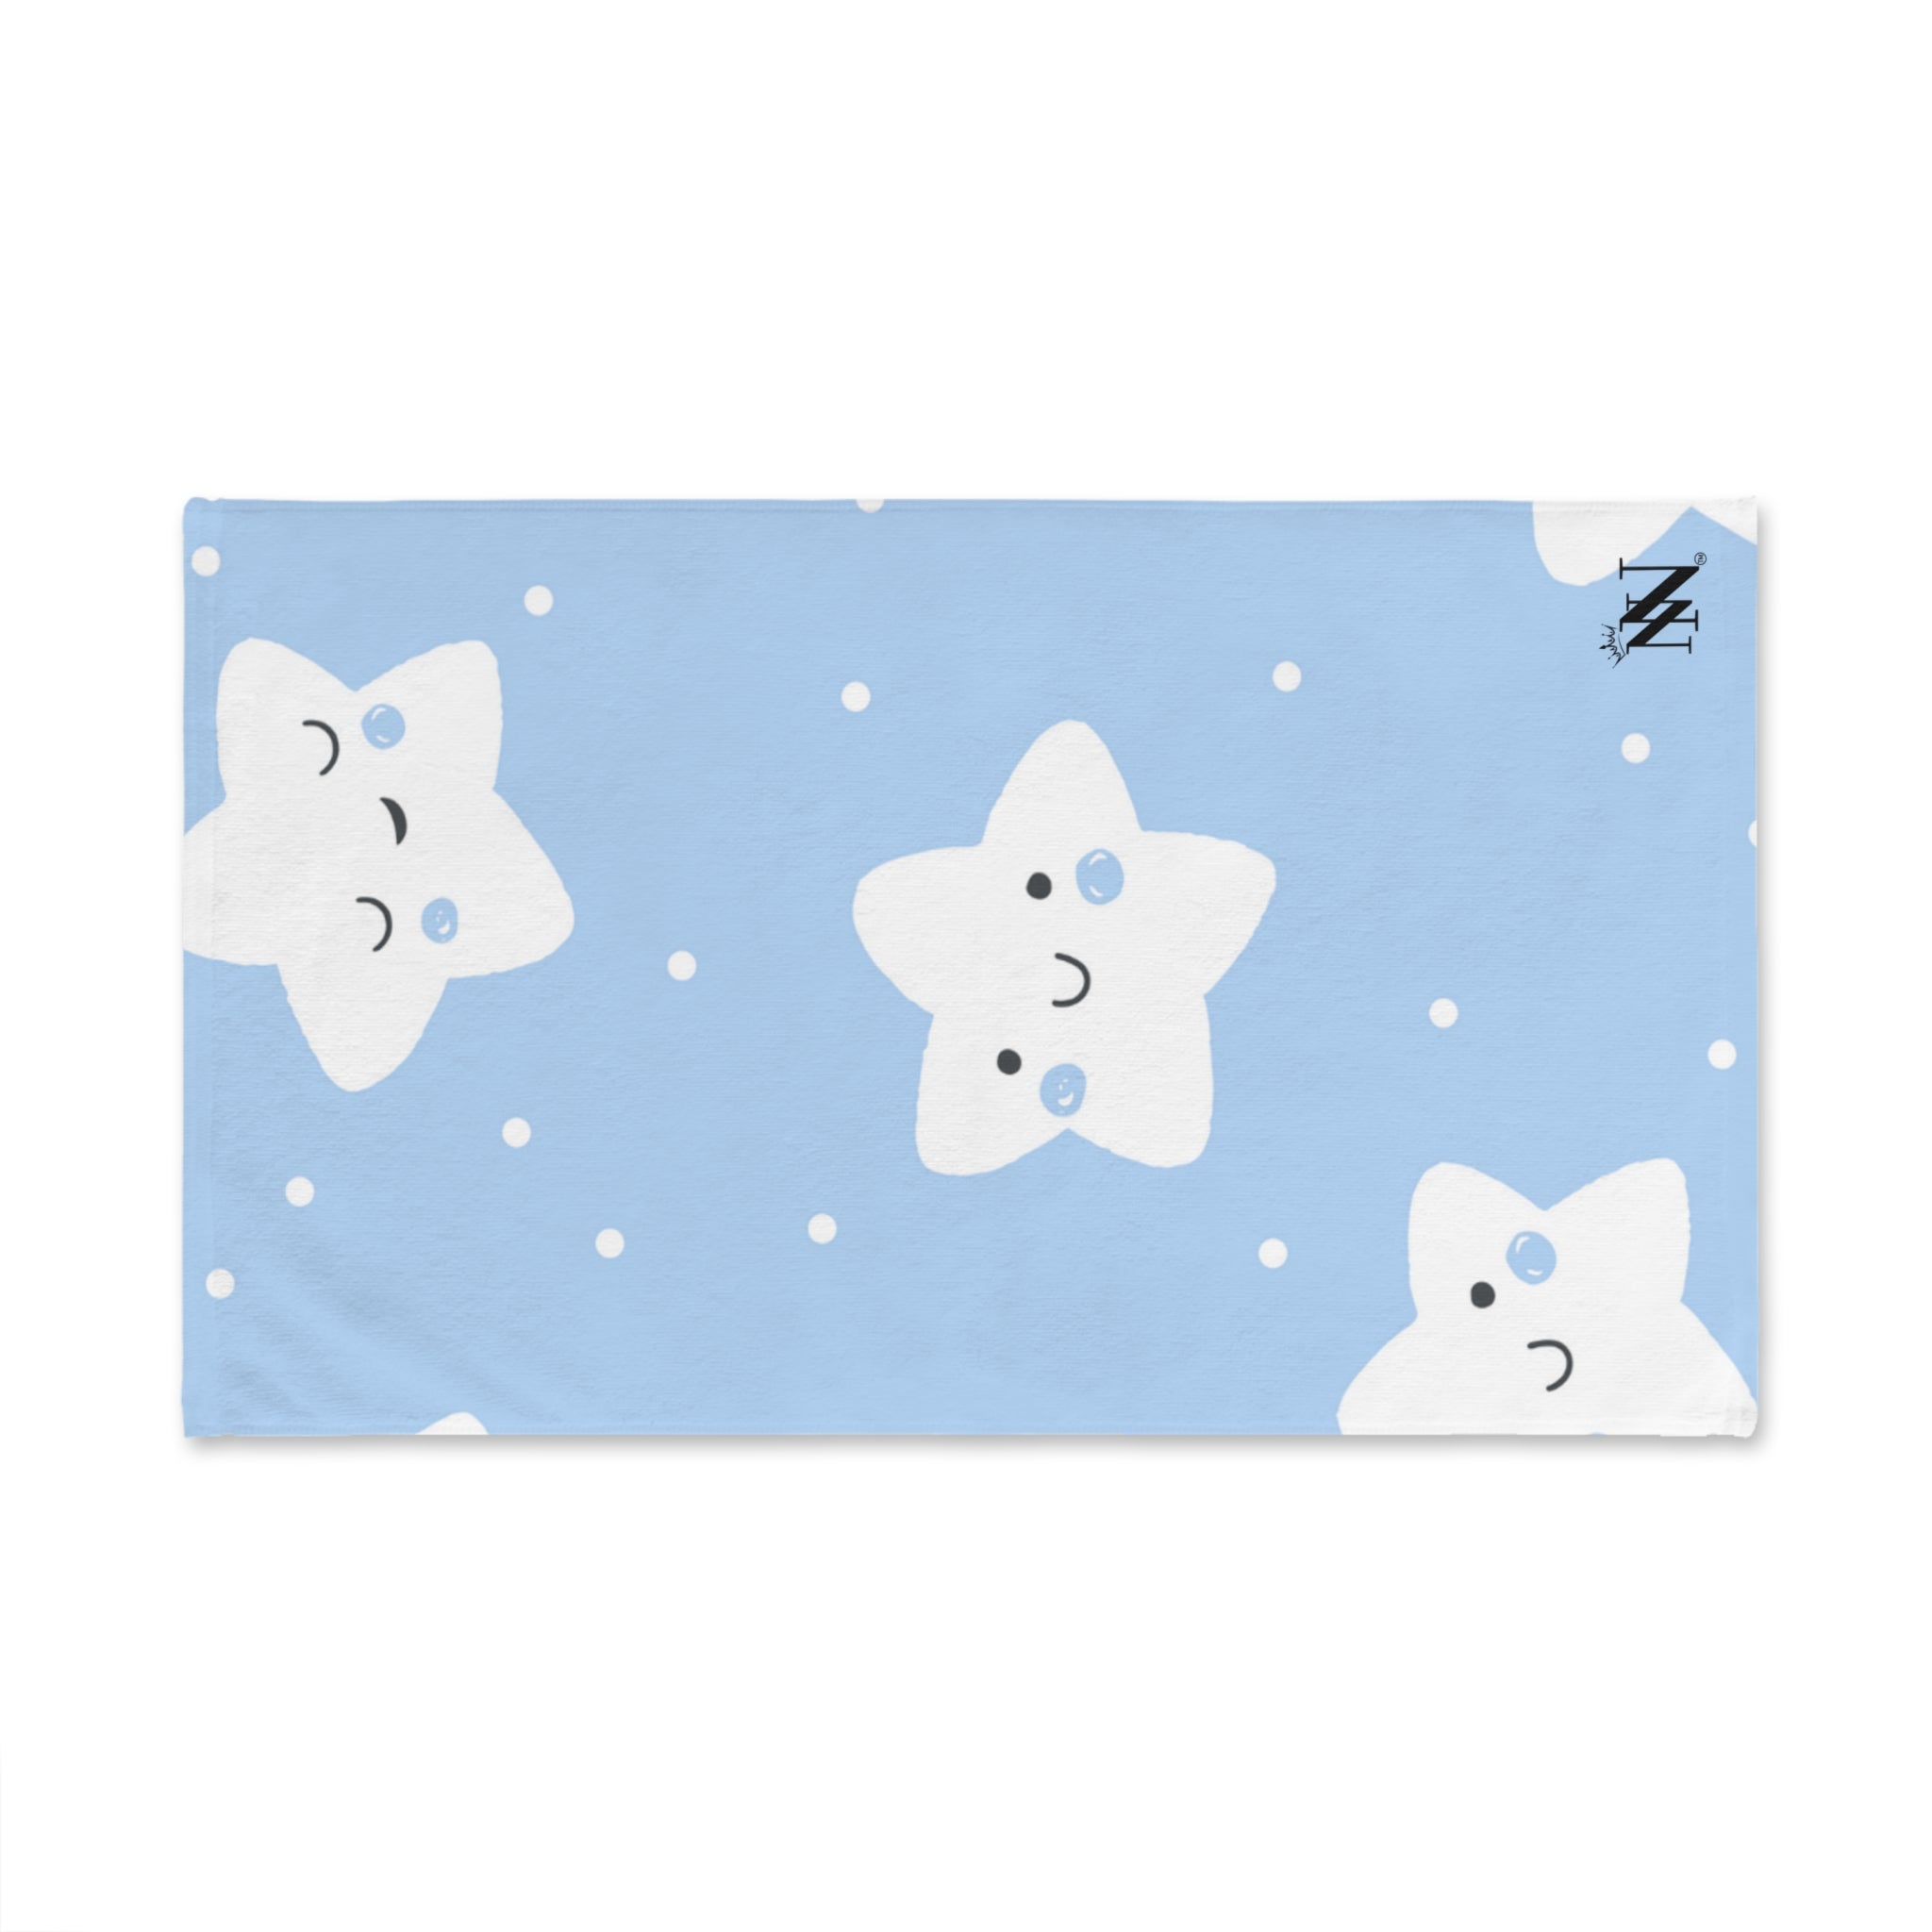 Blue Cute Star White | Funny Gifts for Men - Gifts for Him - Birthday Gifts for Men, Him, Her, Husband, Boyfriend, Girlfriend, New Couple Gifts, Fathers & Valentines Day Gifts, Christmas Gifts NECTAR NAPKINS